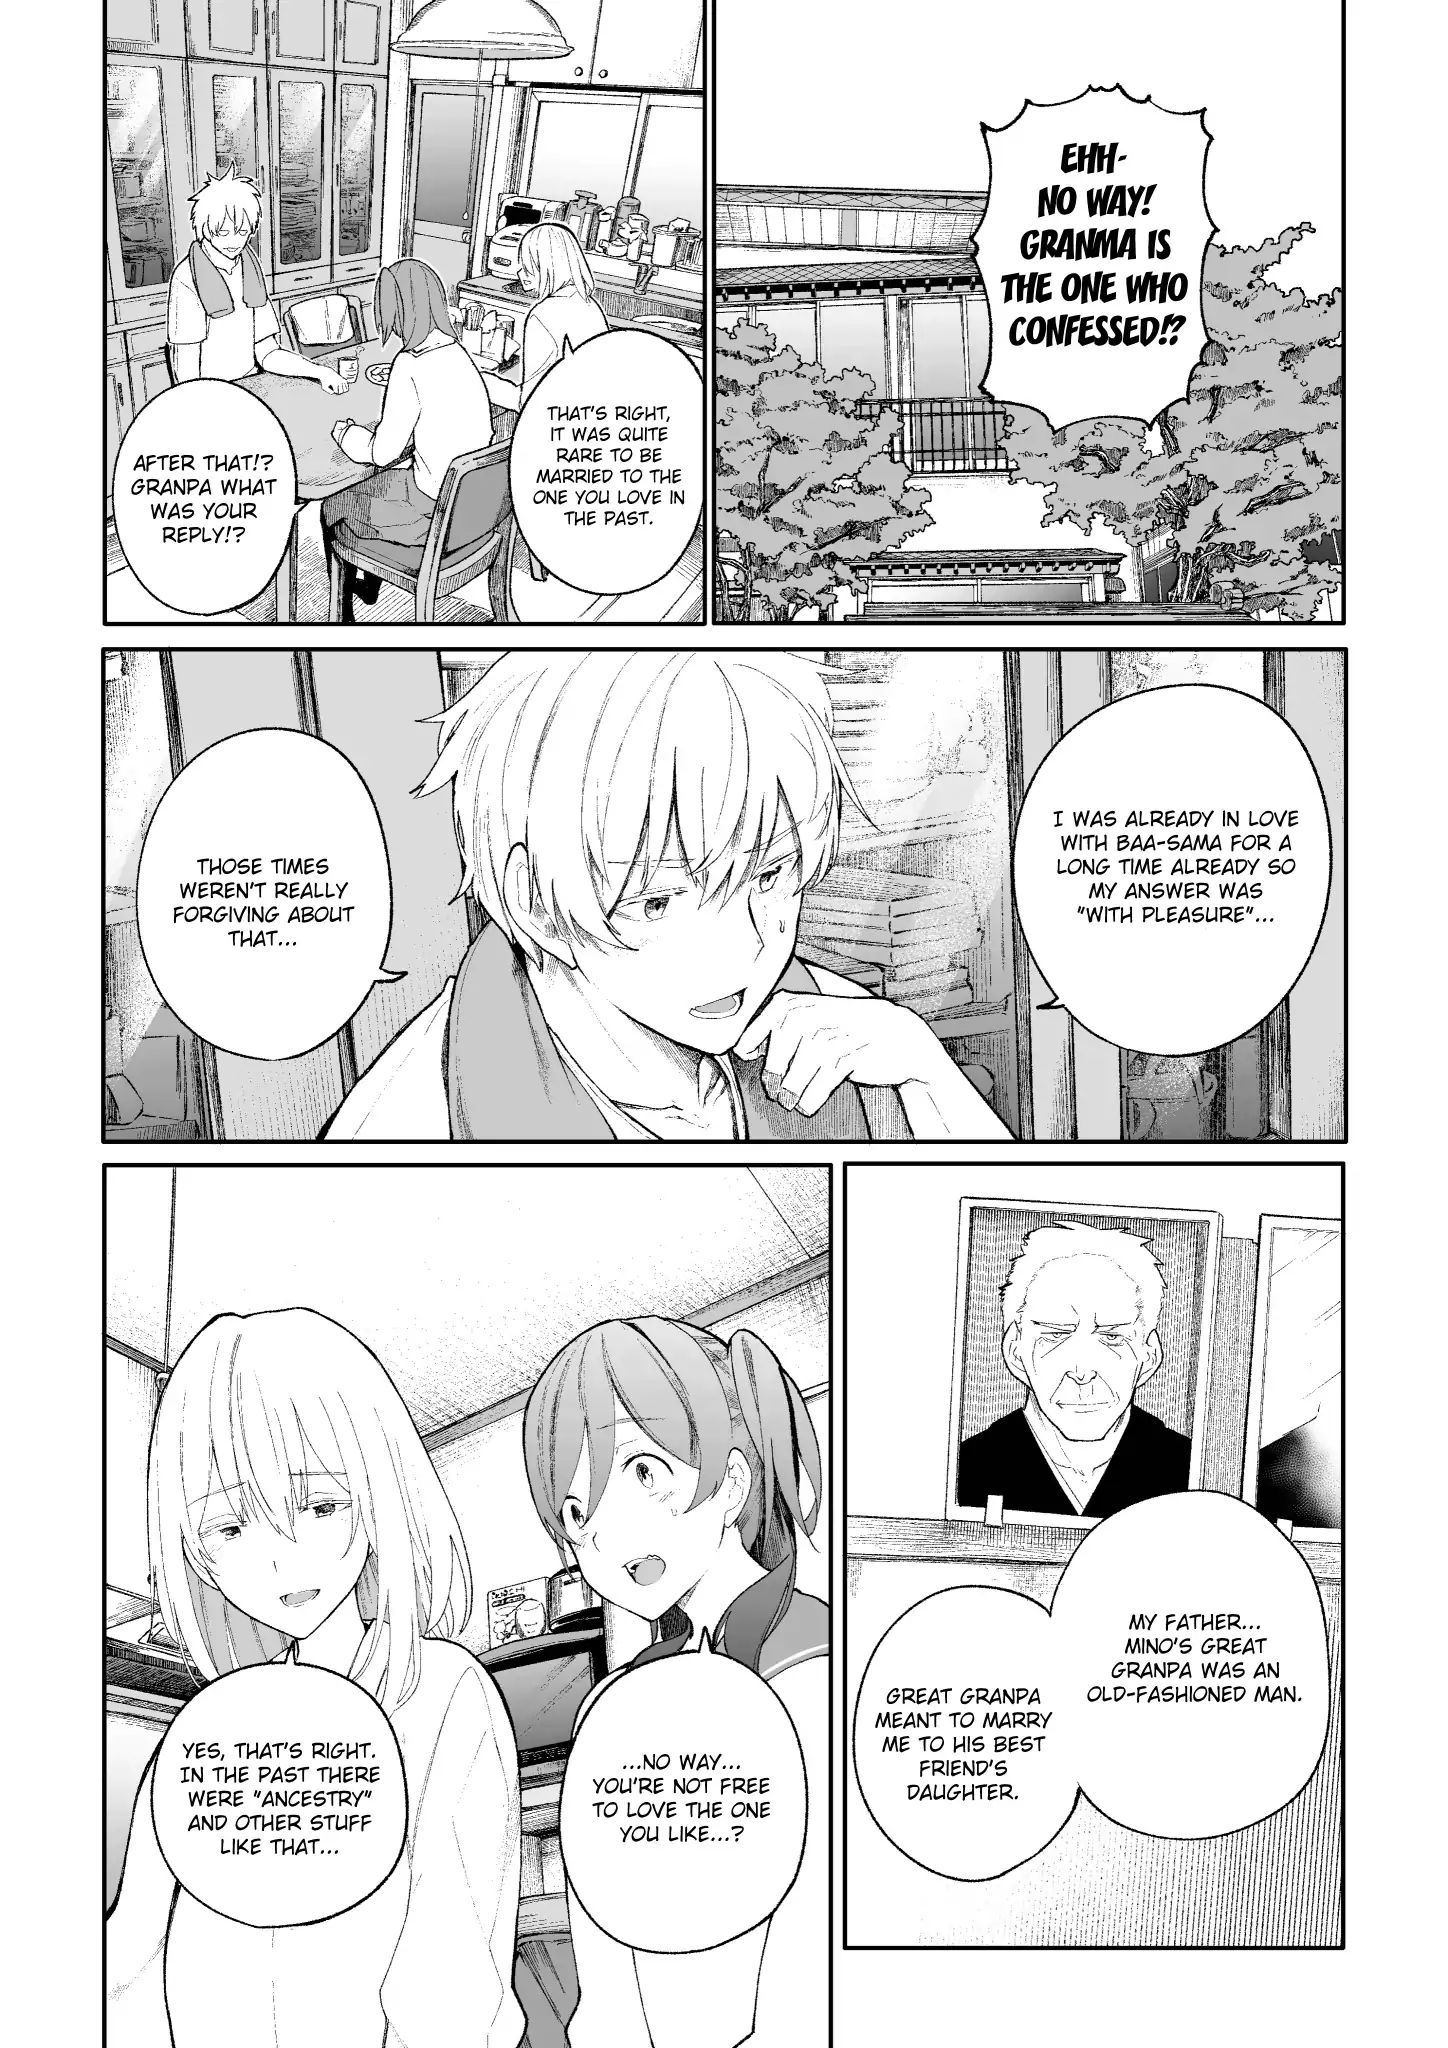 A Story About A Grampa and Granma Returned Back to their Youth. Chapter 8